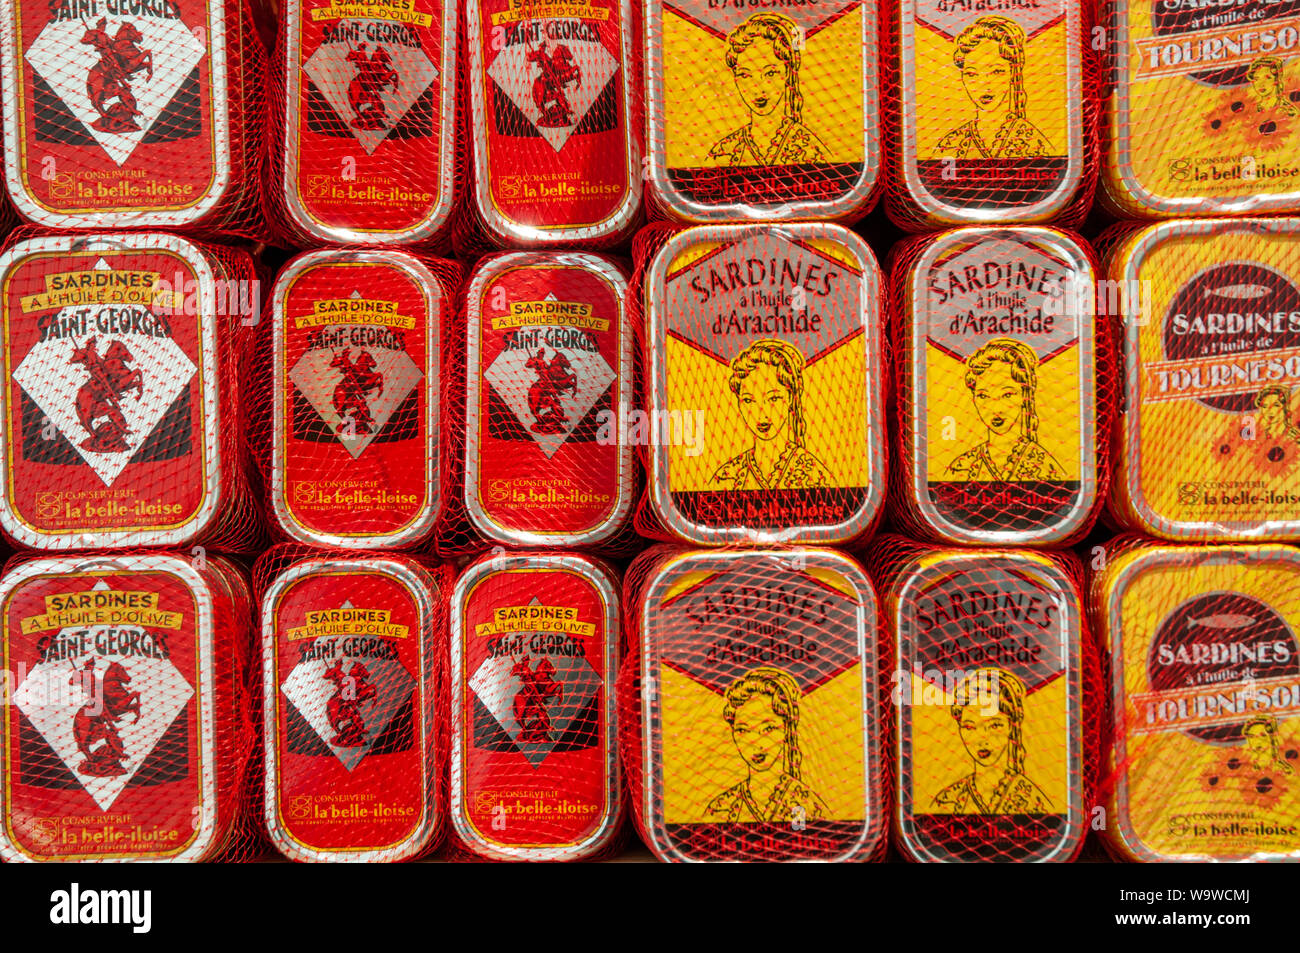 Stacks of tins of various types of sardines on display in Conserverie la belle-iloise in Dieppe, France. Stock Photo